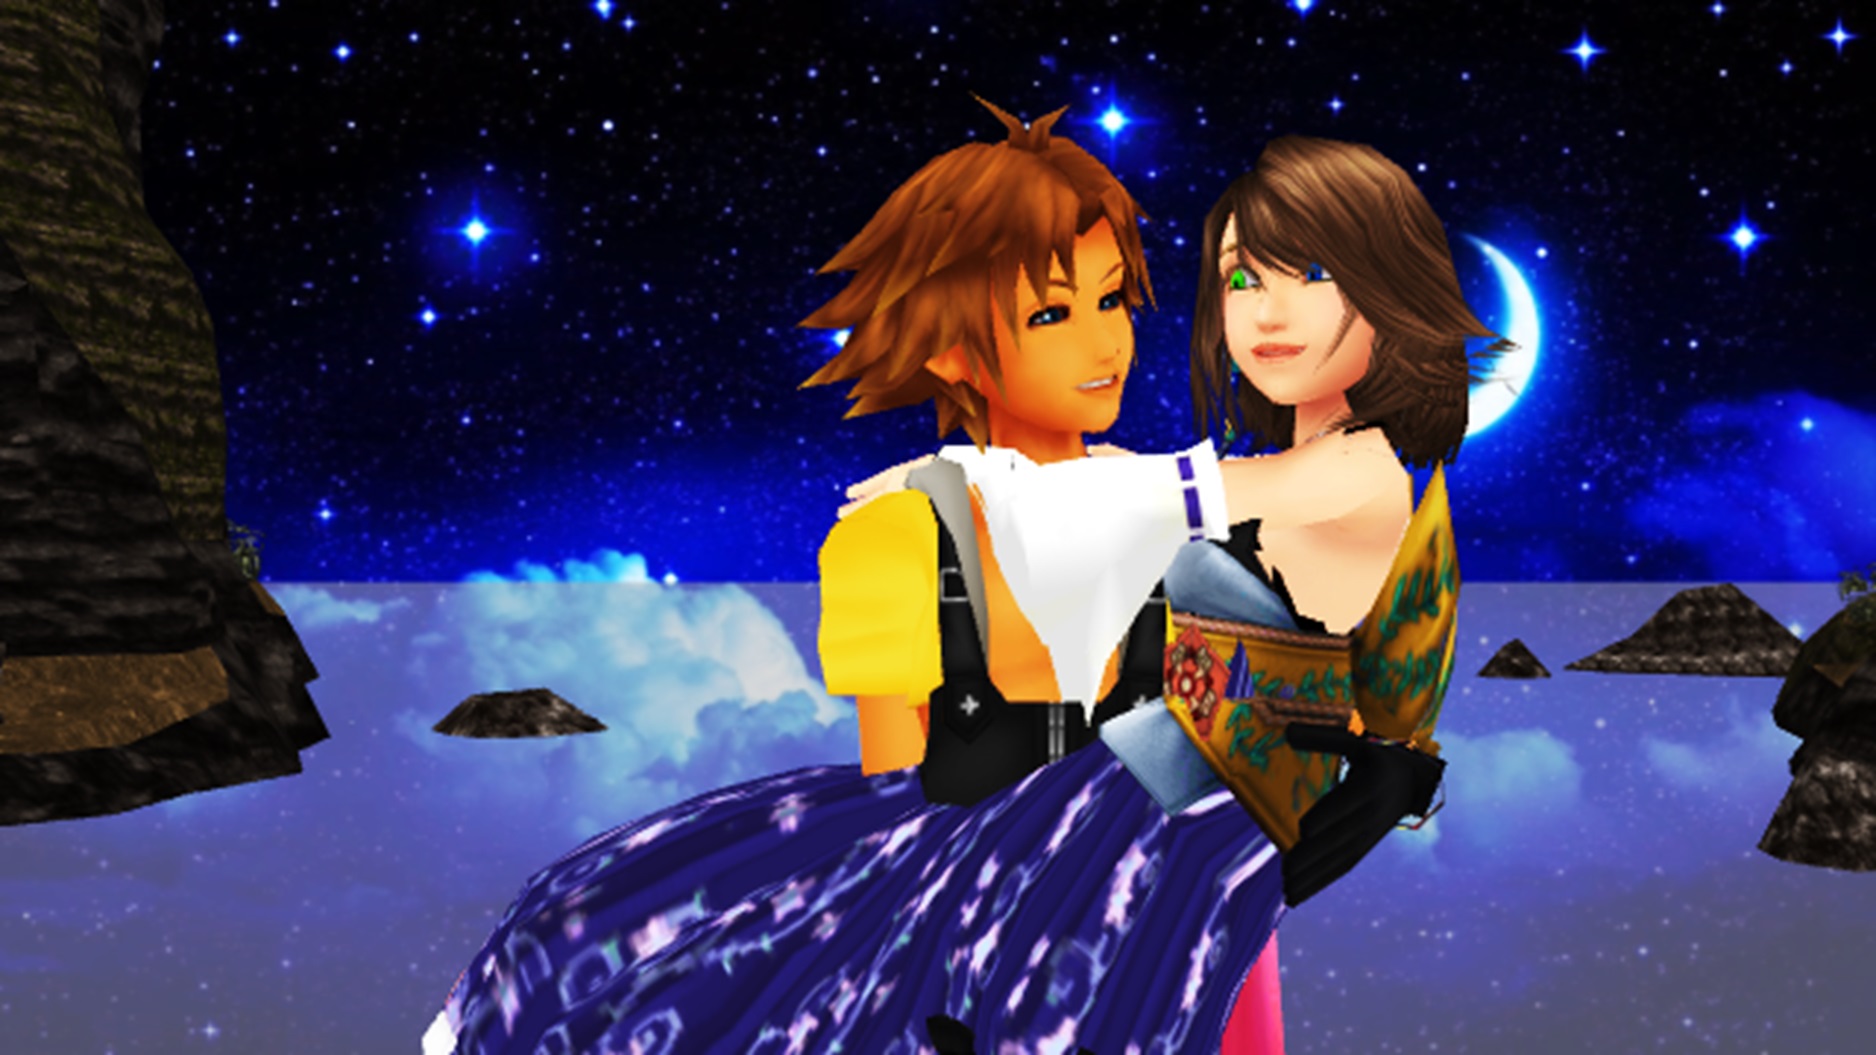 Yuna Amp Tidus Image And Together Forever Final